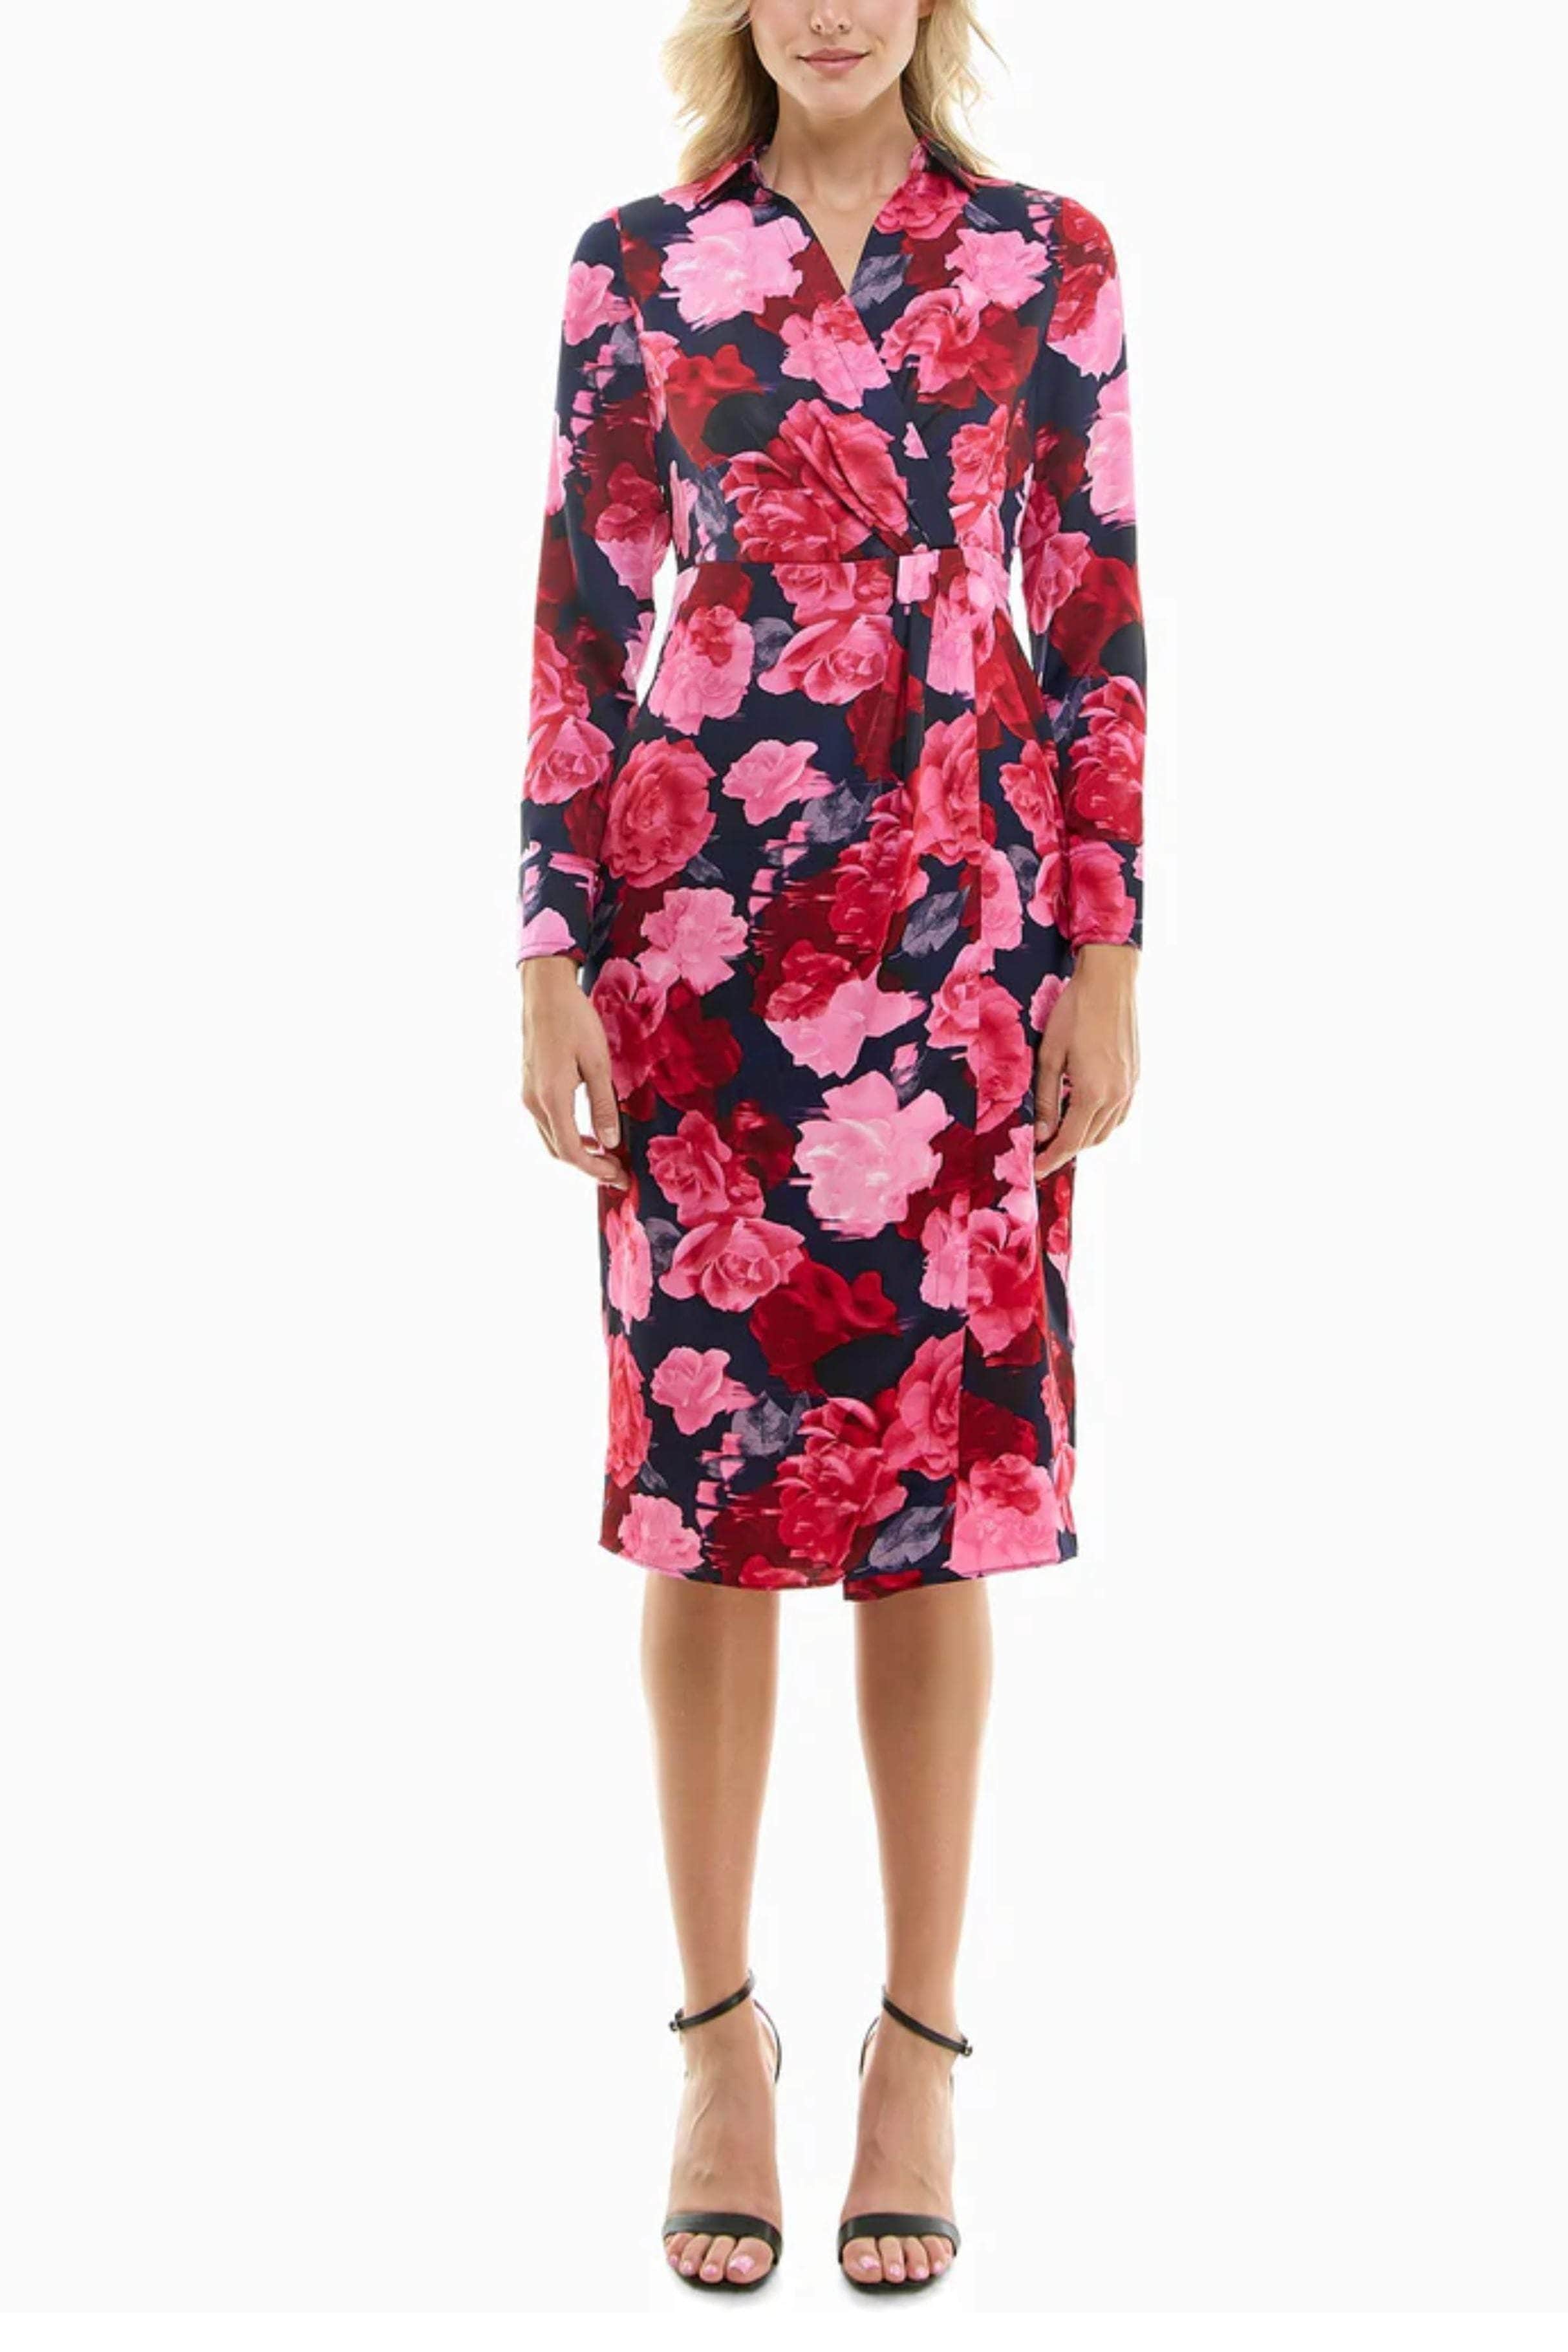 New Yorker's Apparel MD3F1420E - Floral Printed Long Sleeve Formal Dress
